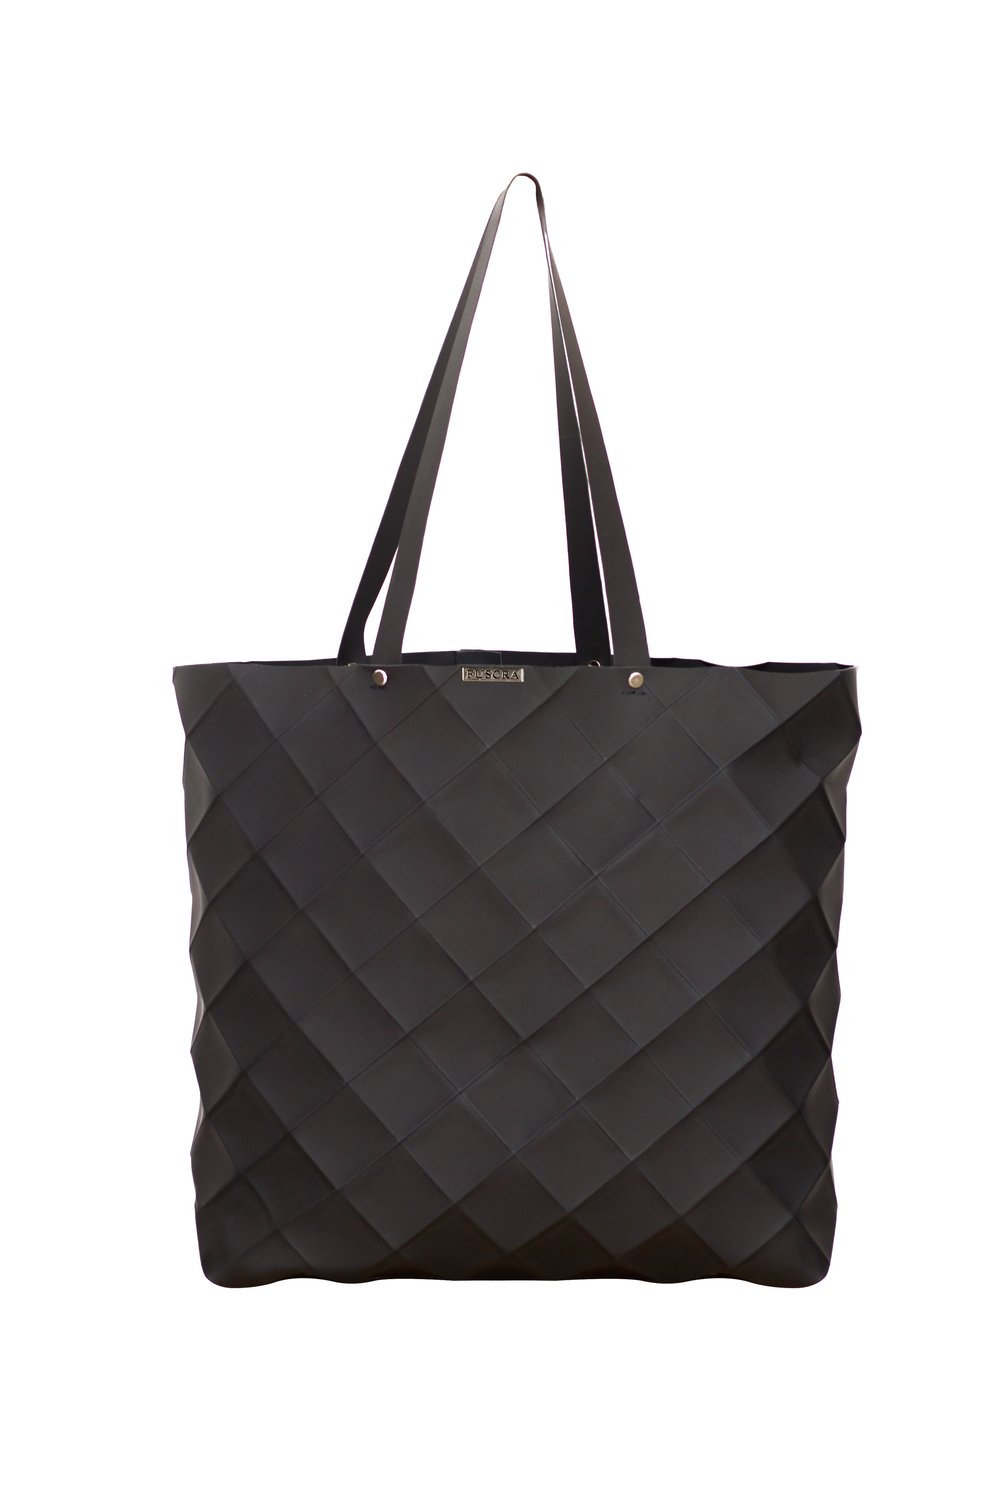 Image of GIANT BAG - ORIGAMI STYLE IN RECYCLED LEATHER